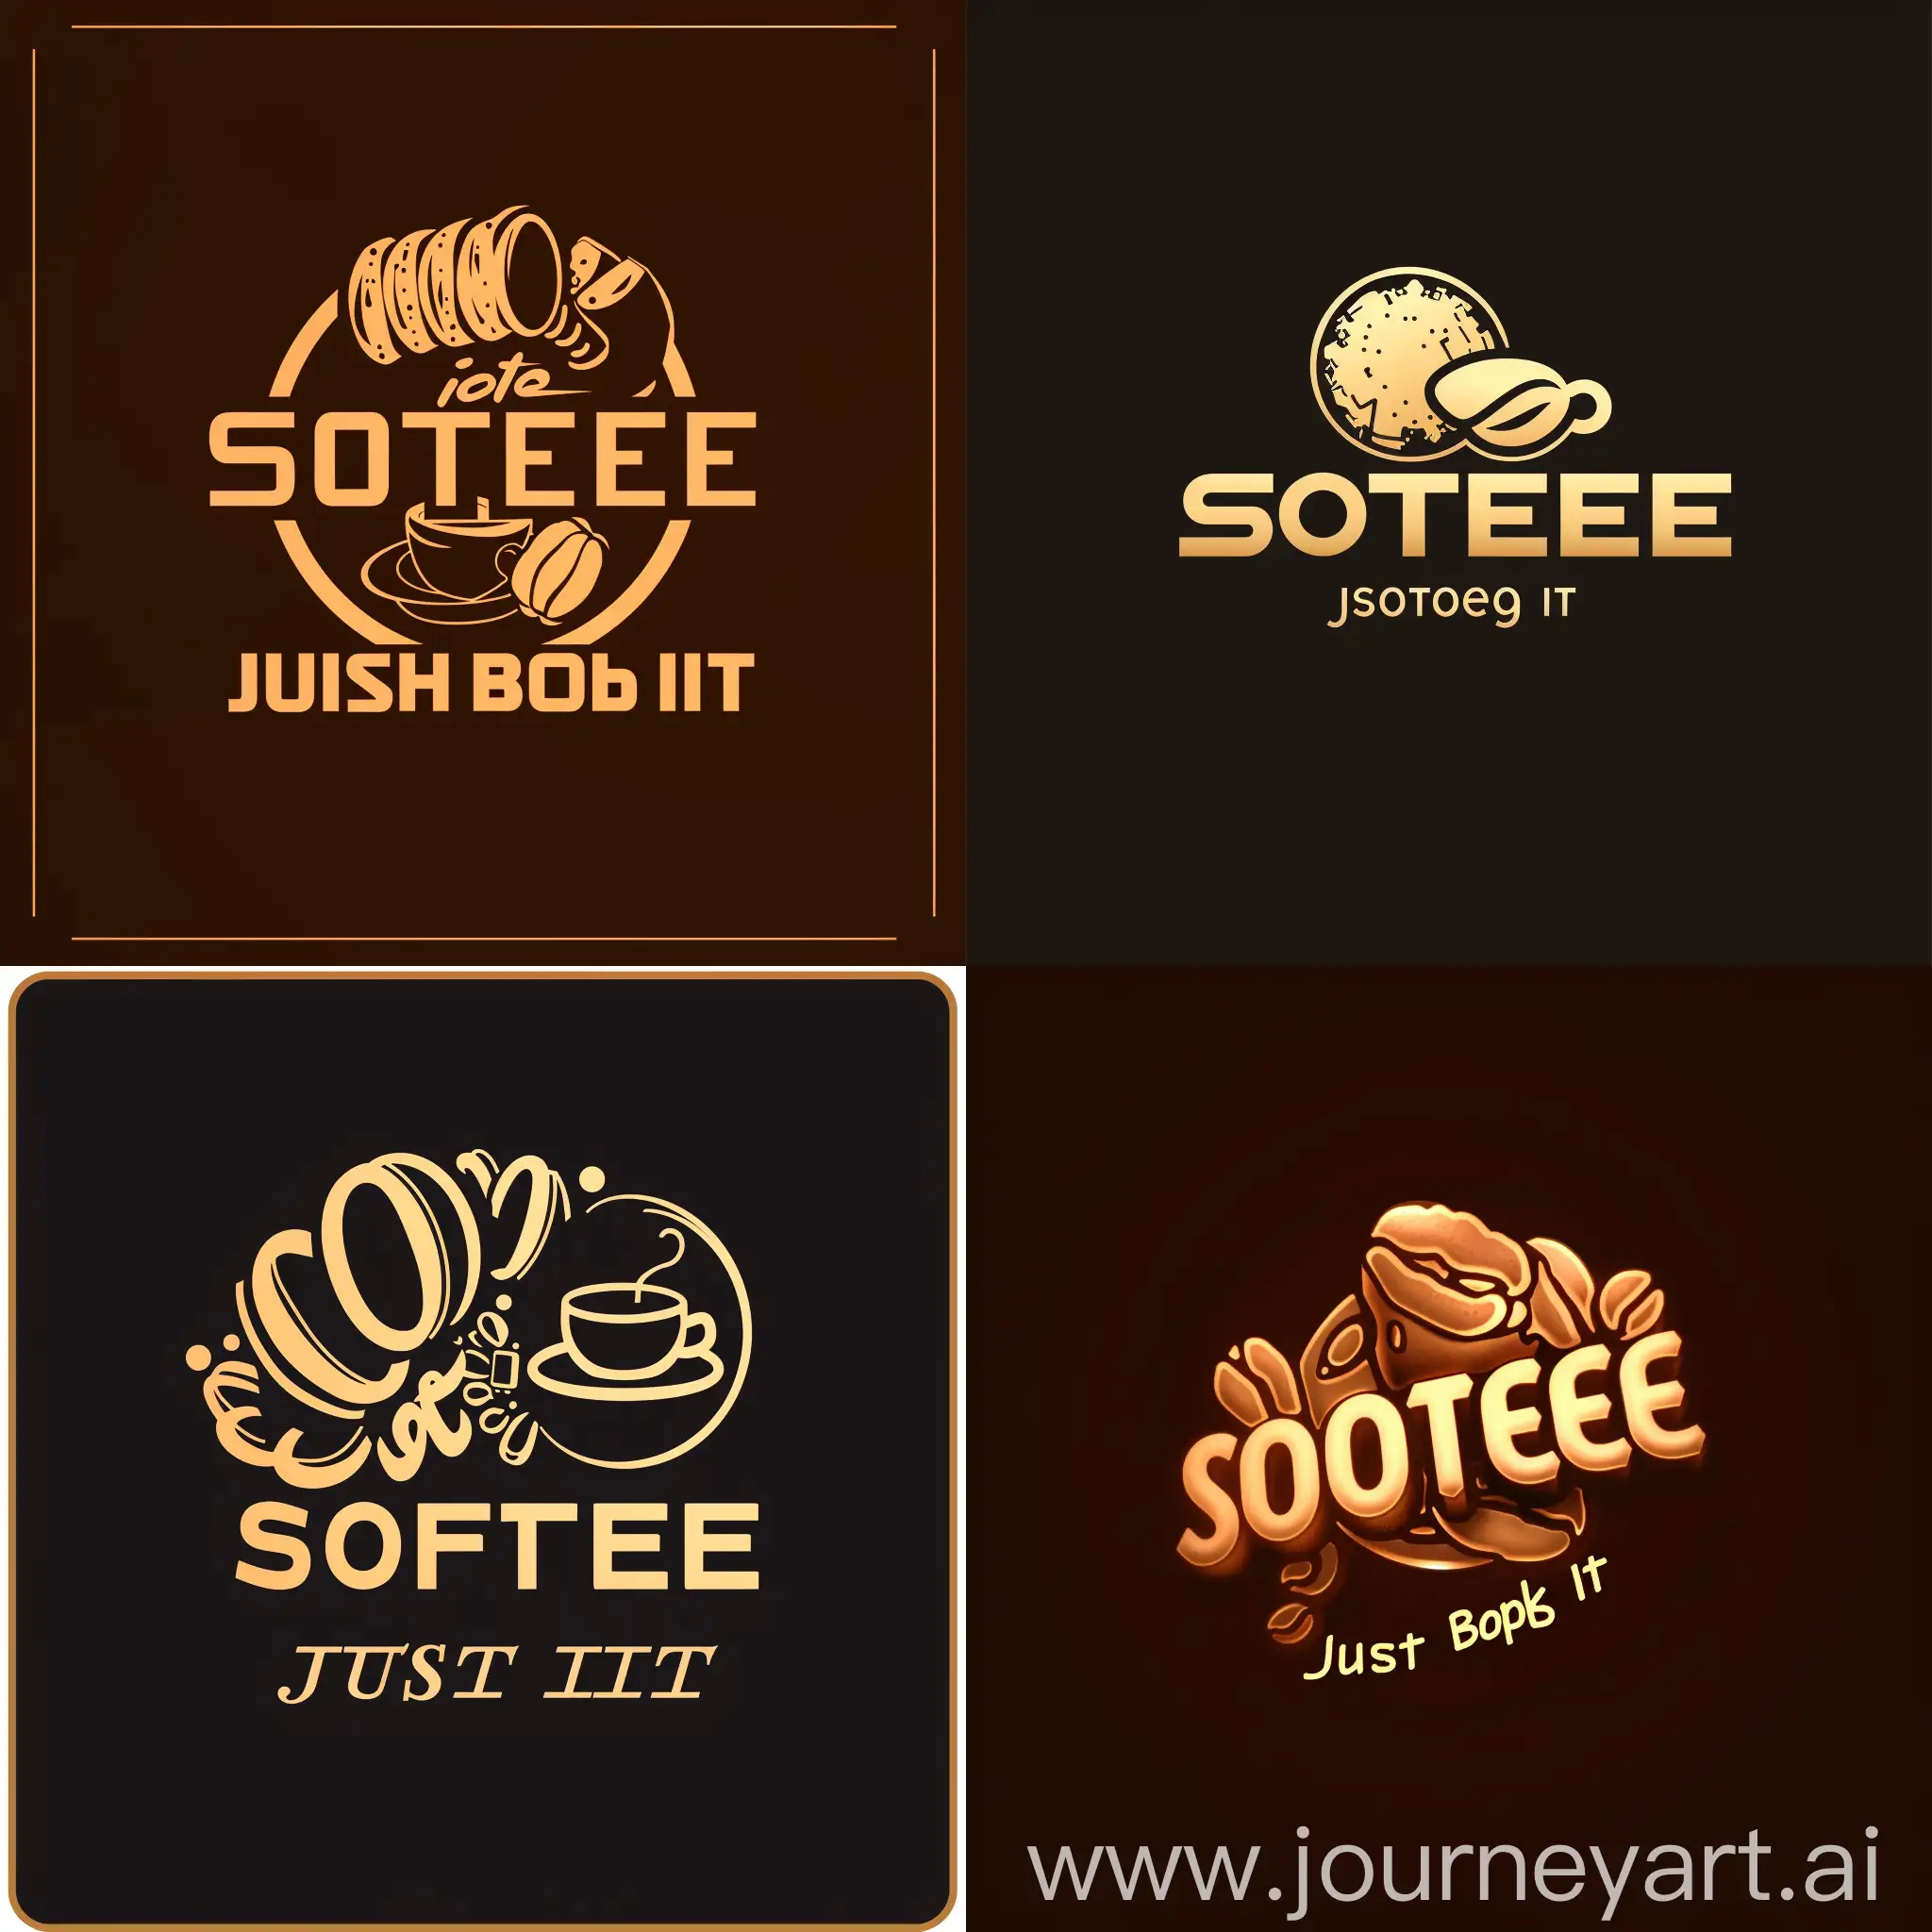 Softee-CPU-and-Coffee-Logo-Tech-and-Beverage-Fusion-with-Just-Blog-It-Slogan